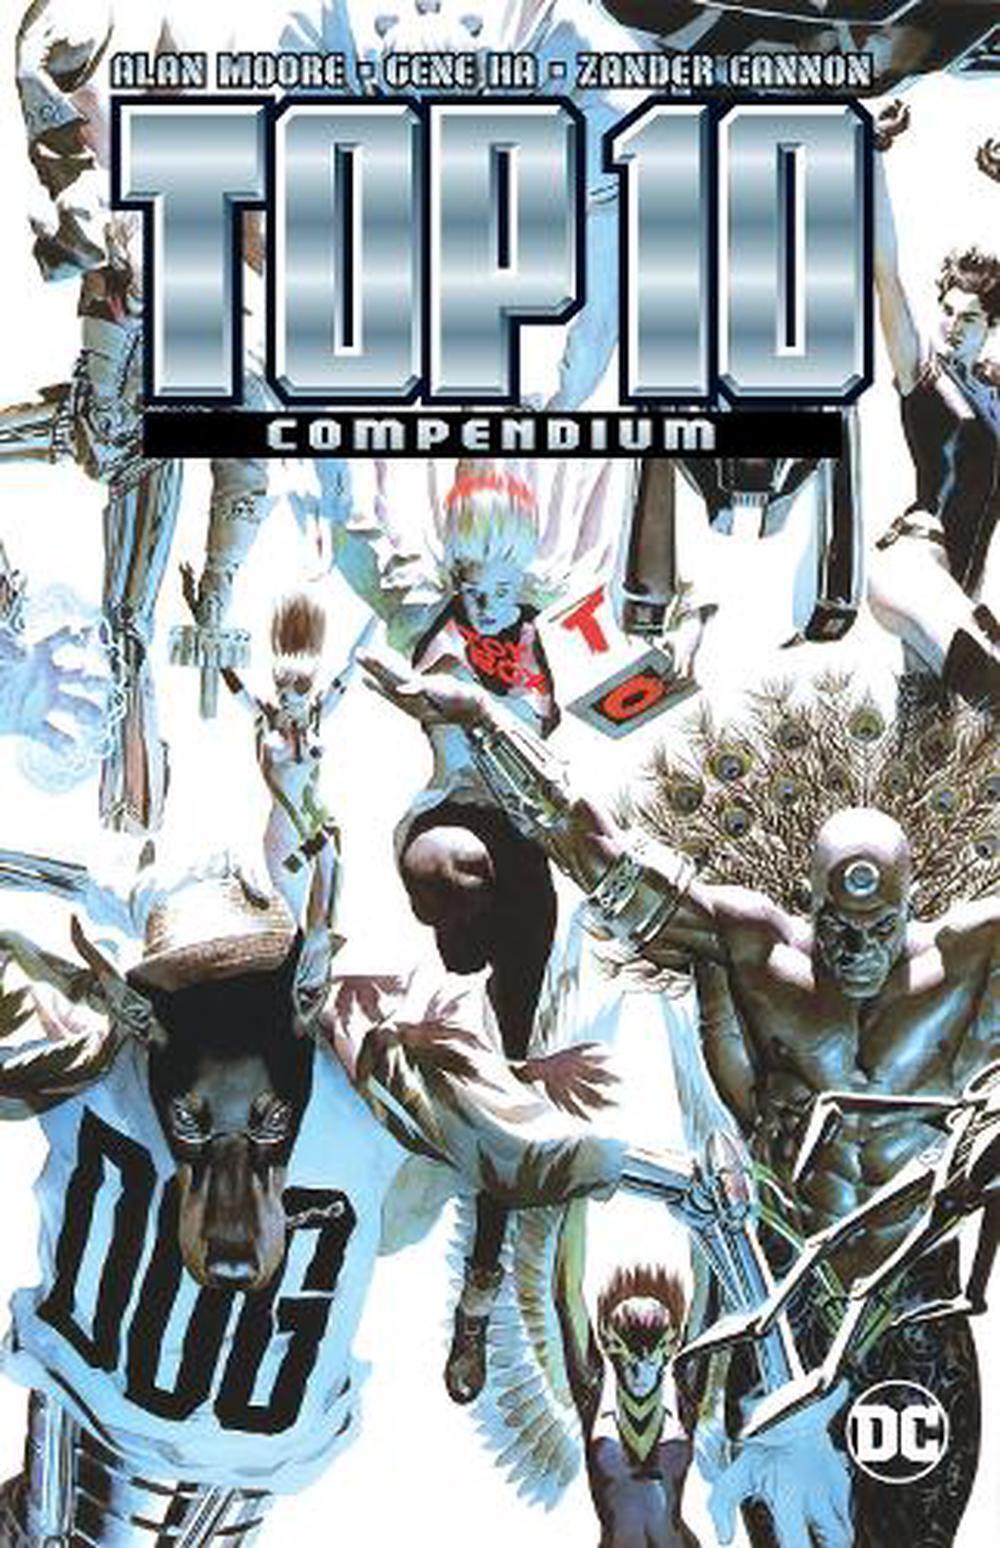 Top 10 Compendium: TR - Trade Paperback by Alan Moore (English) Paperback Book